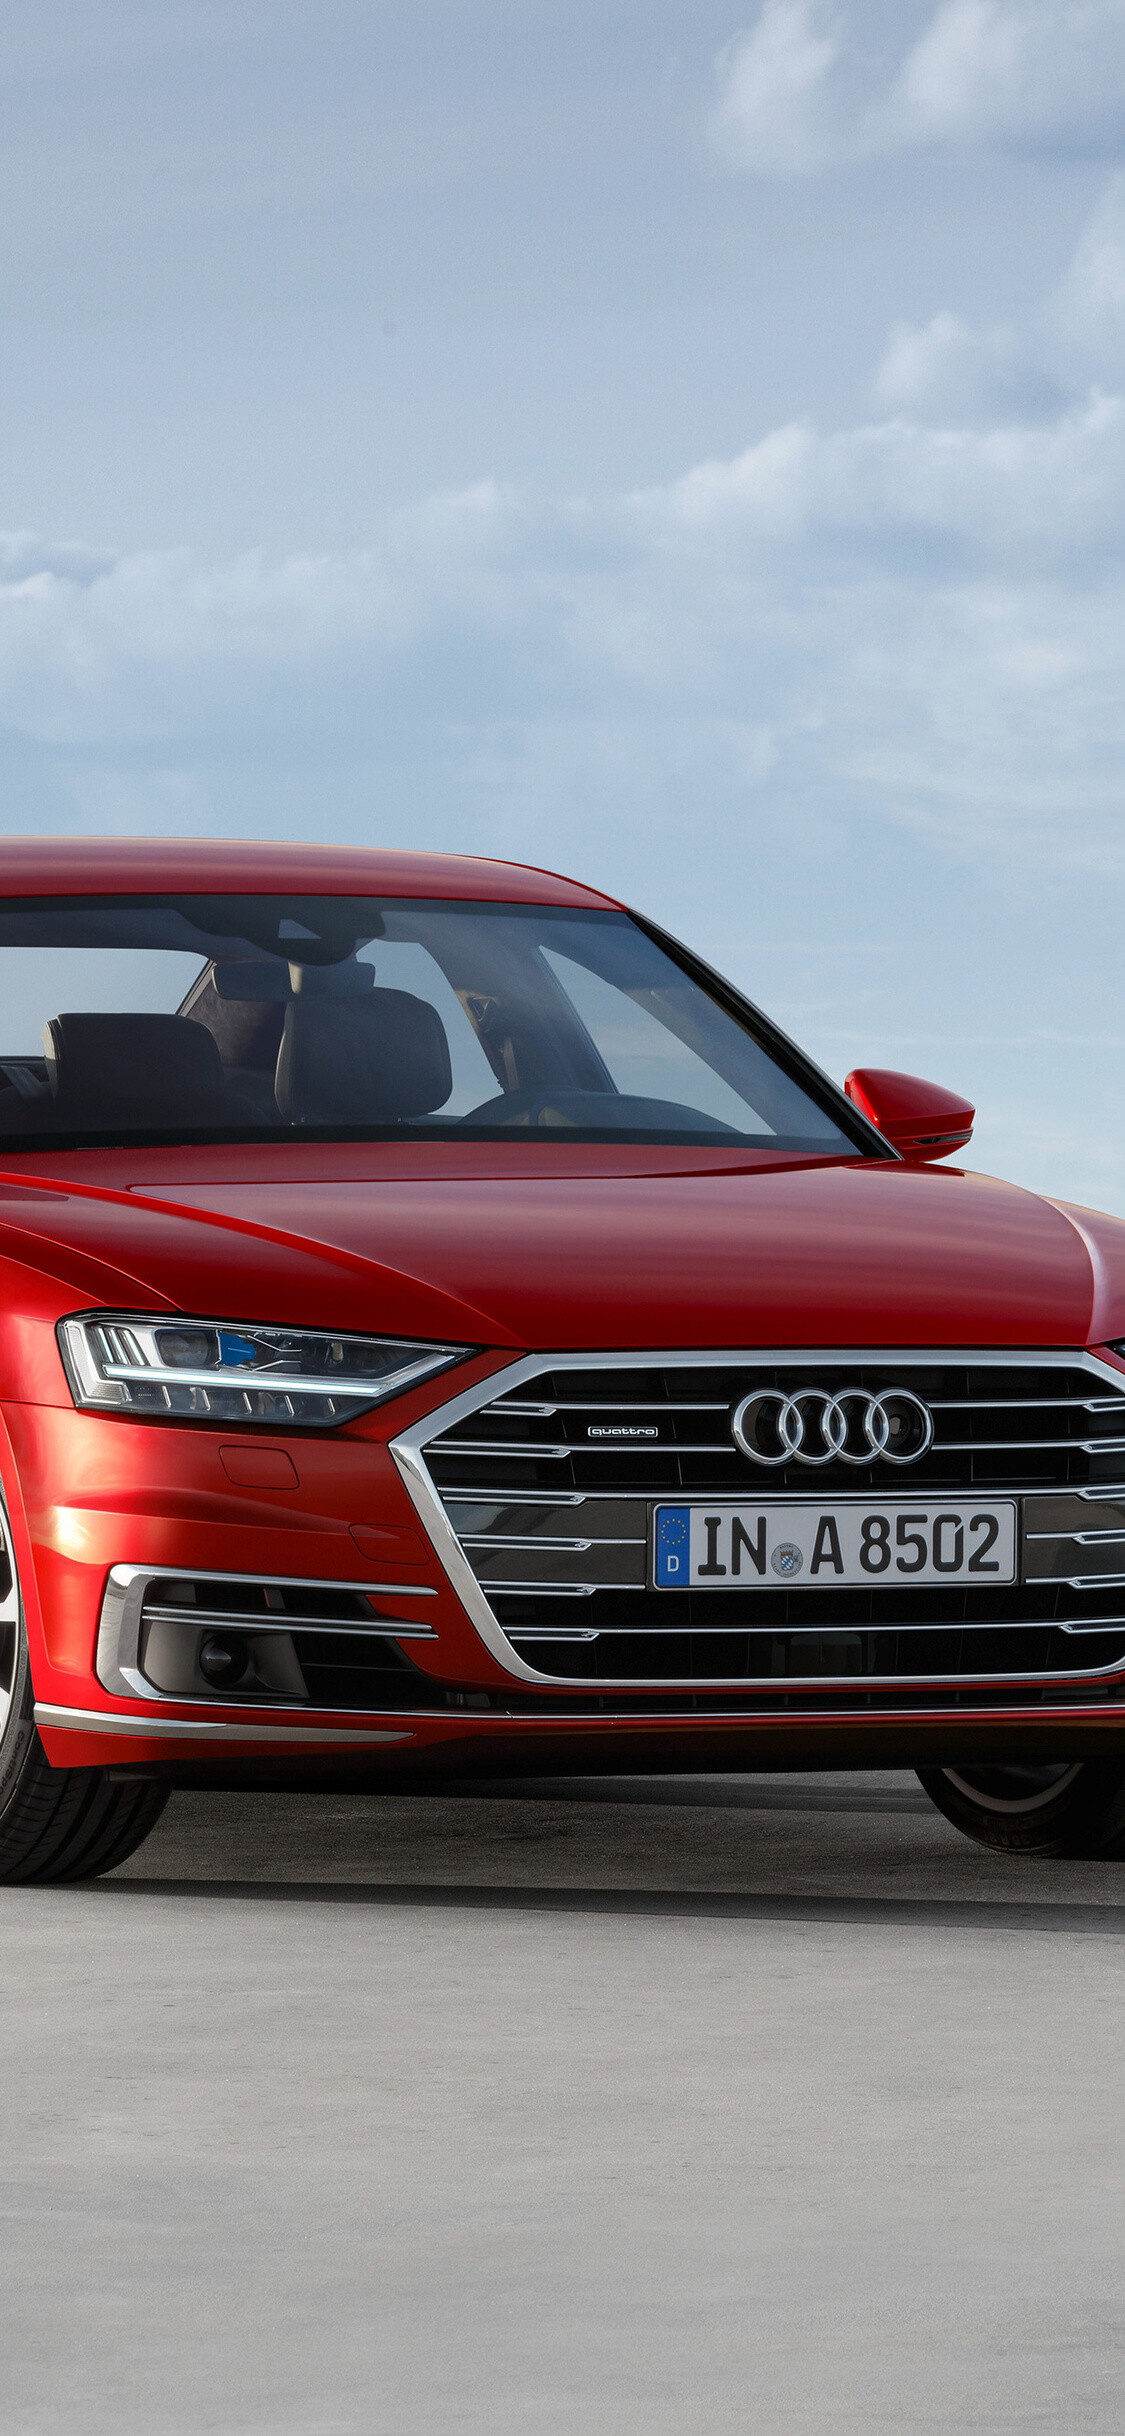 Audi A8: A 5 seater sedan, Comes with a turbocharged V6 engine. 1130x2440 HD Background.